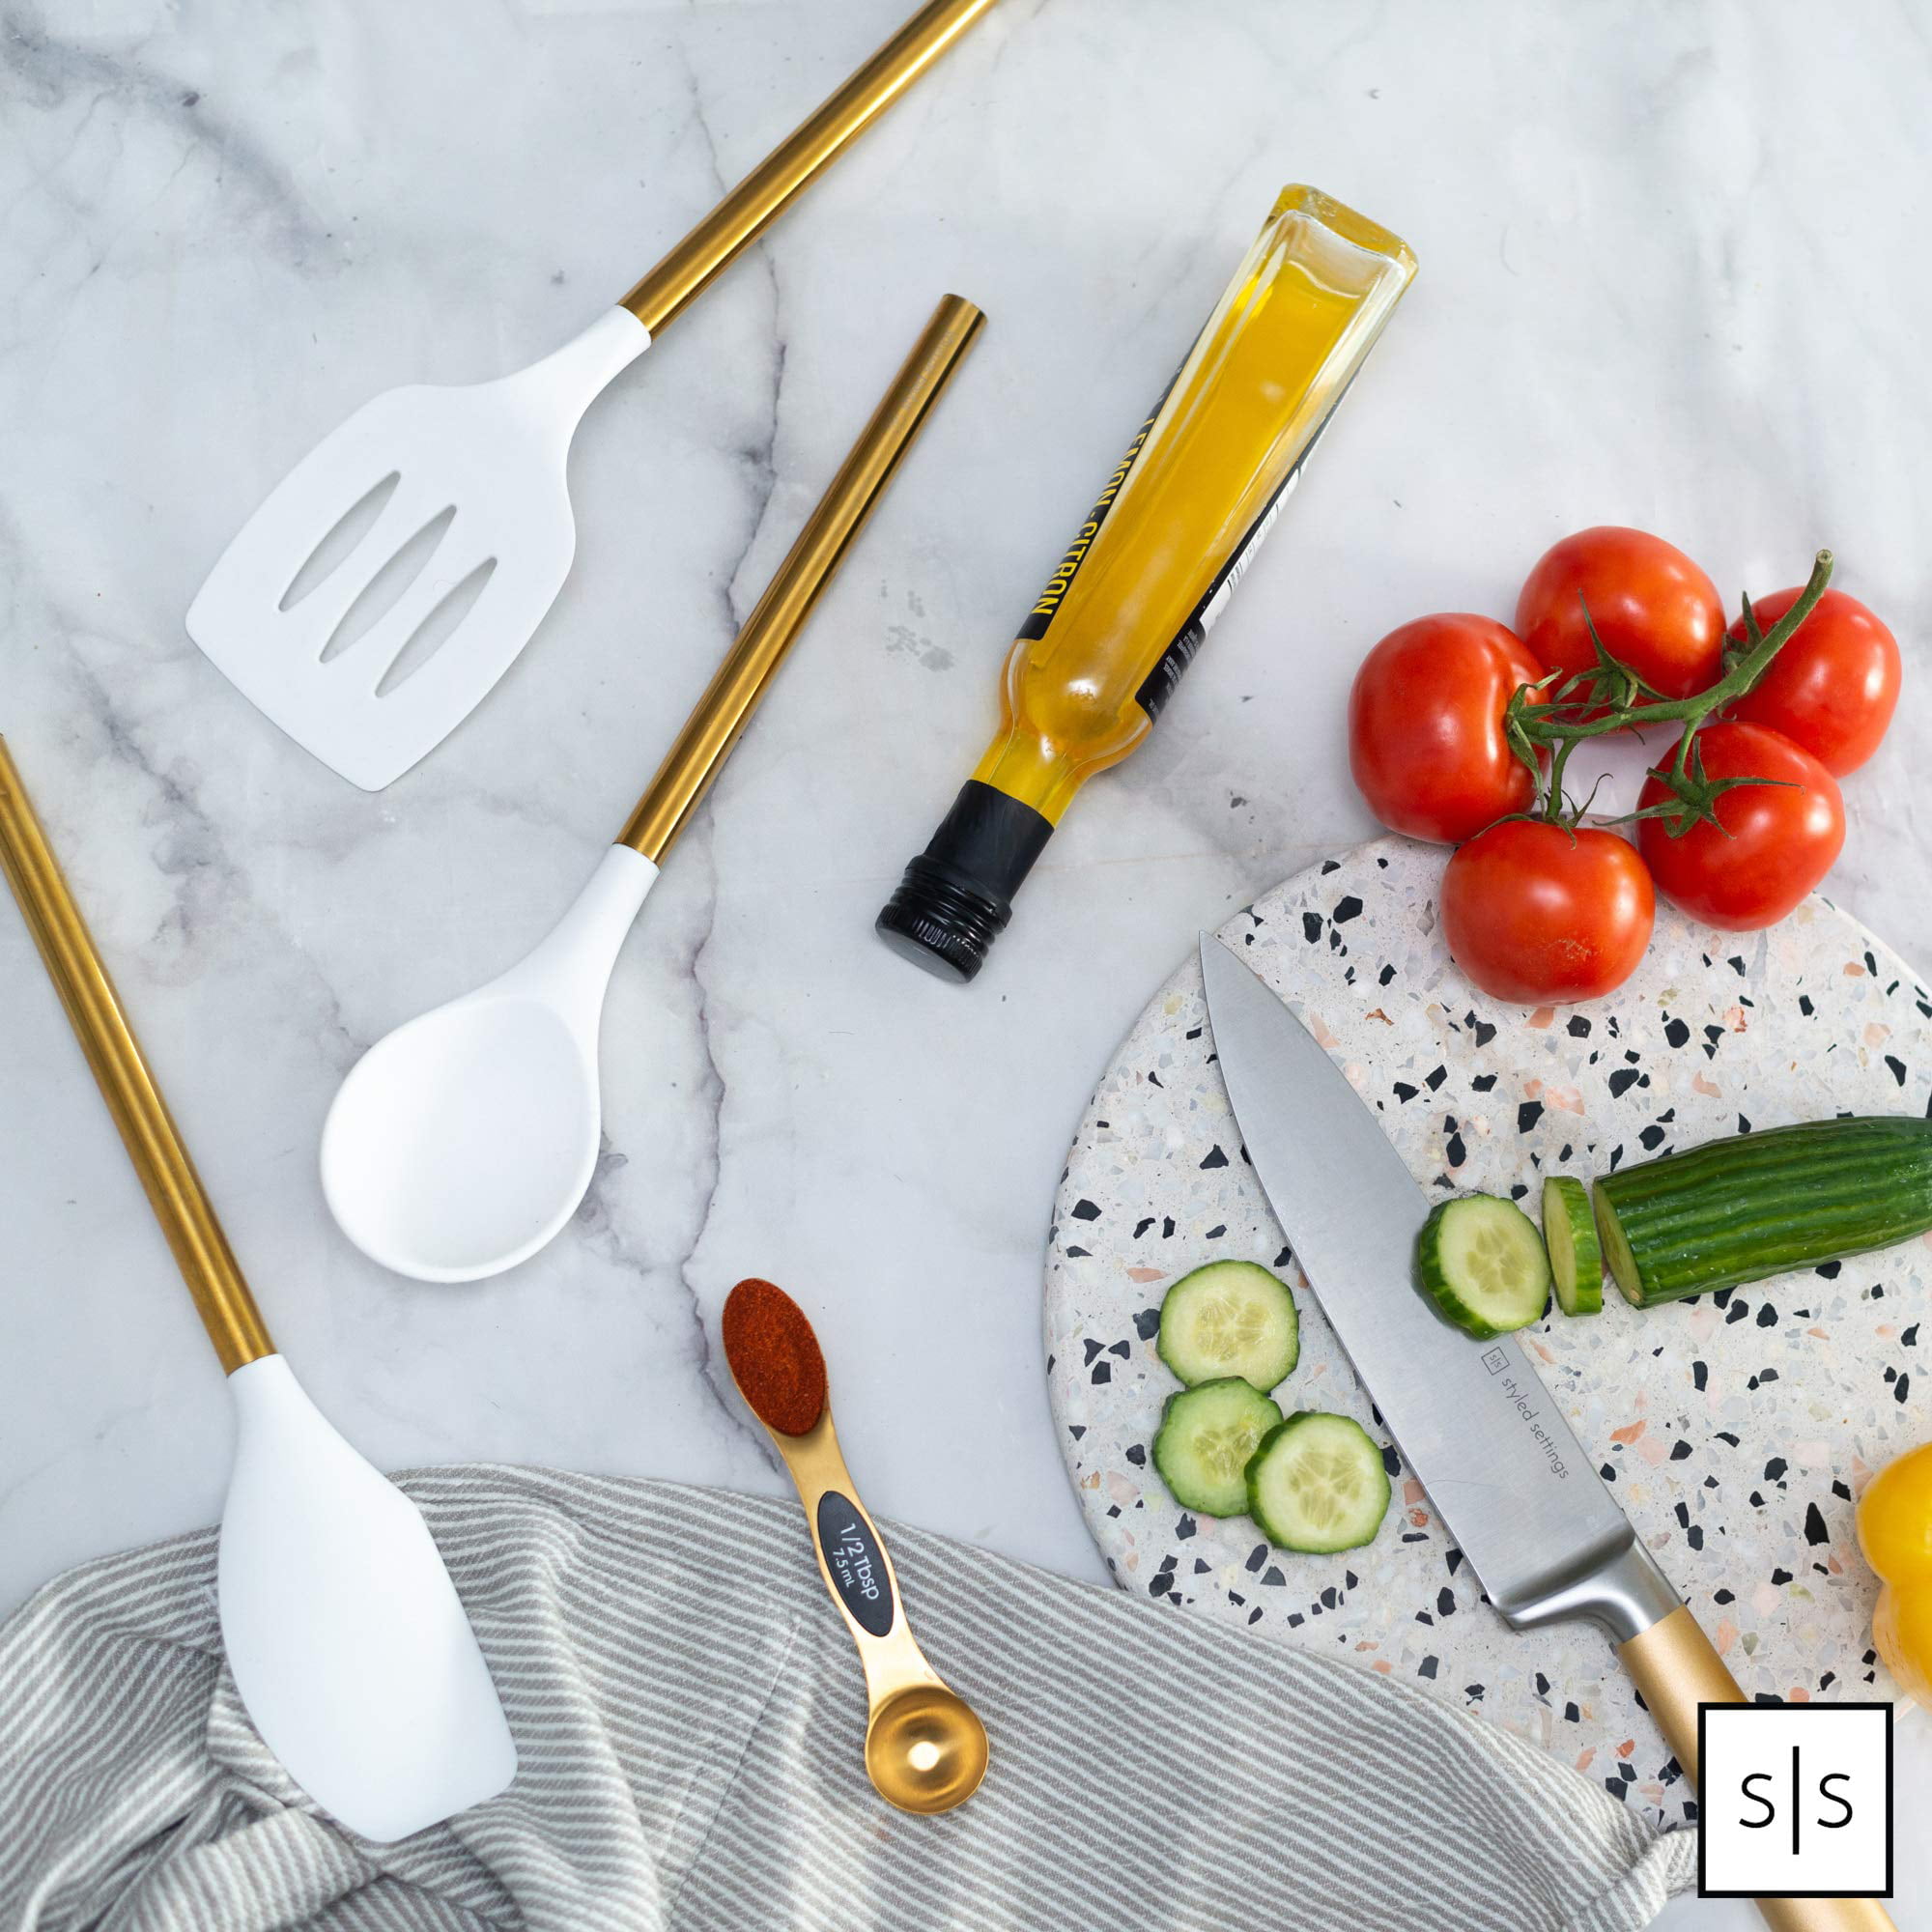  STYLED SETTINGS White Silicone and Gold Kitchen Utensils Set  for Modern Cooking and Serving, Stainless Steel Gold Cooking Utensils and  Gold Serving Utensils- Luxe White and Gold Kitchen Accessories : Health